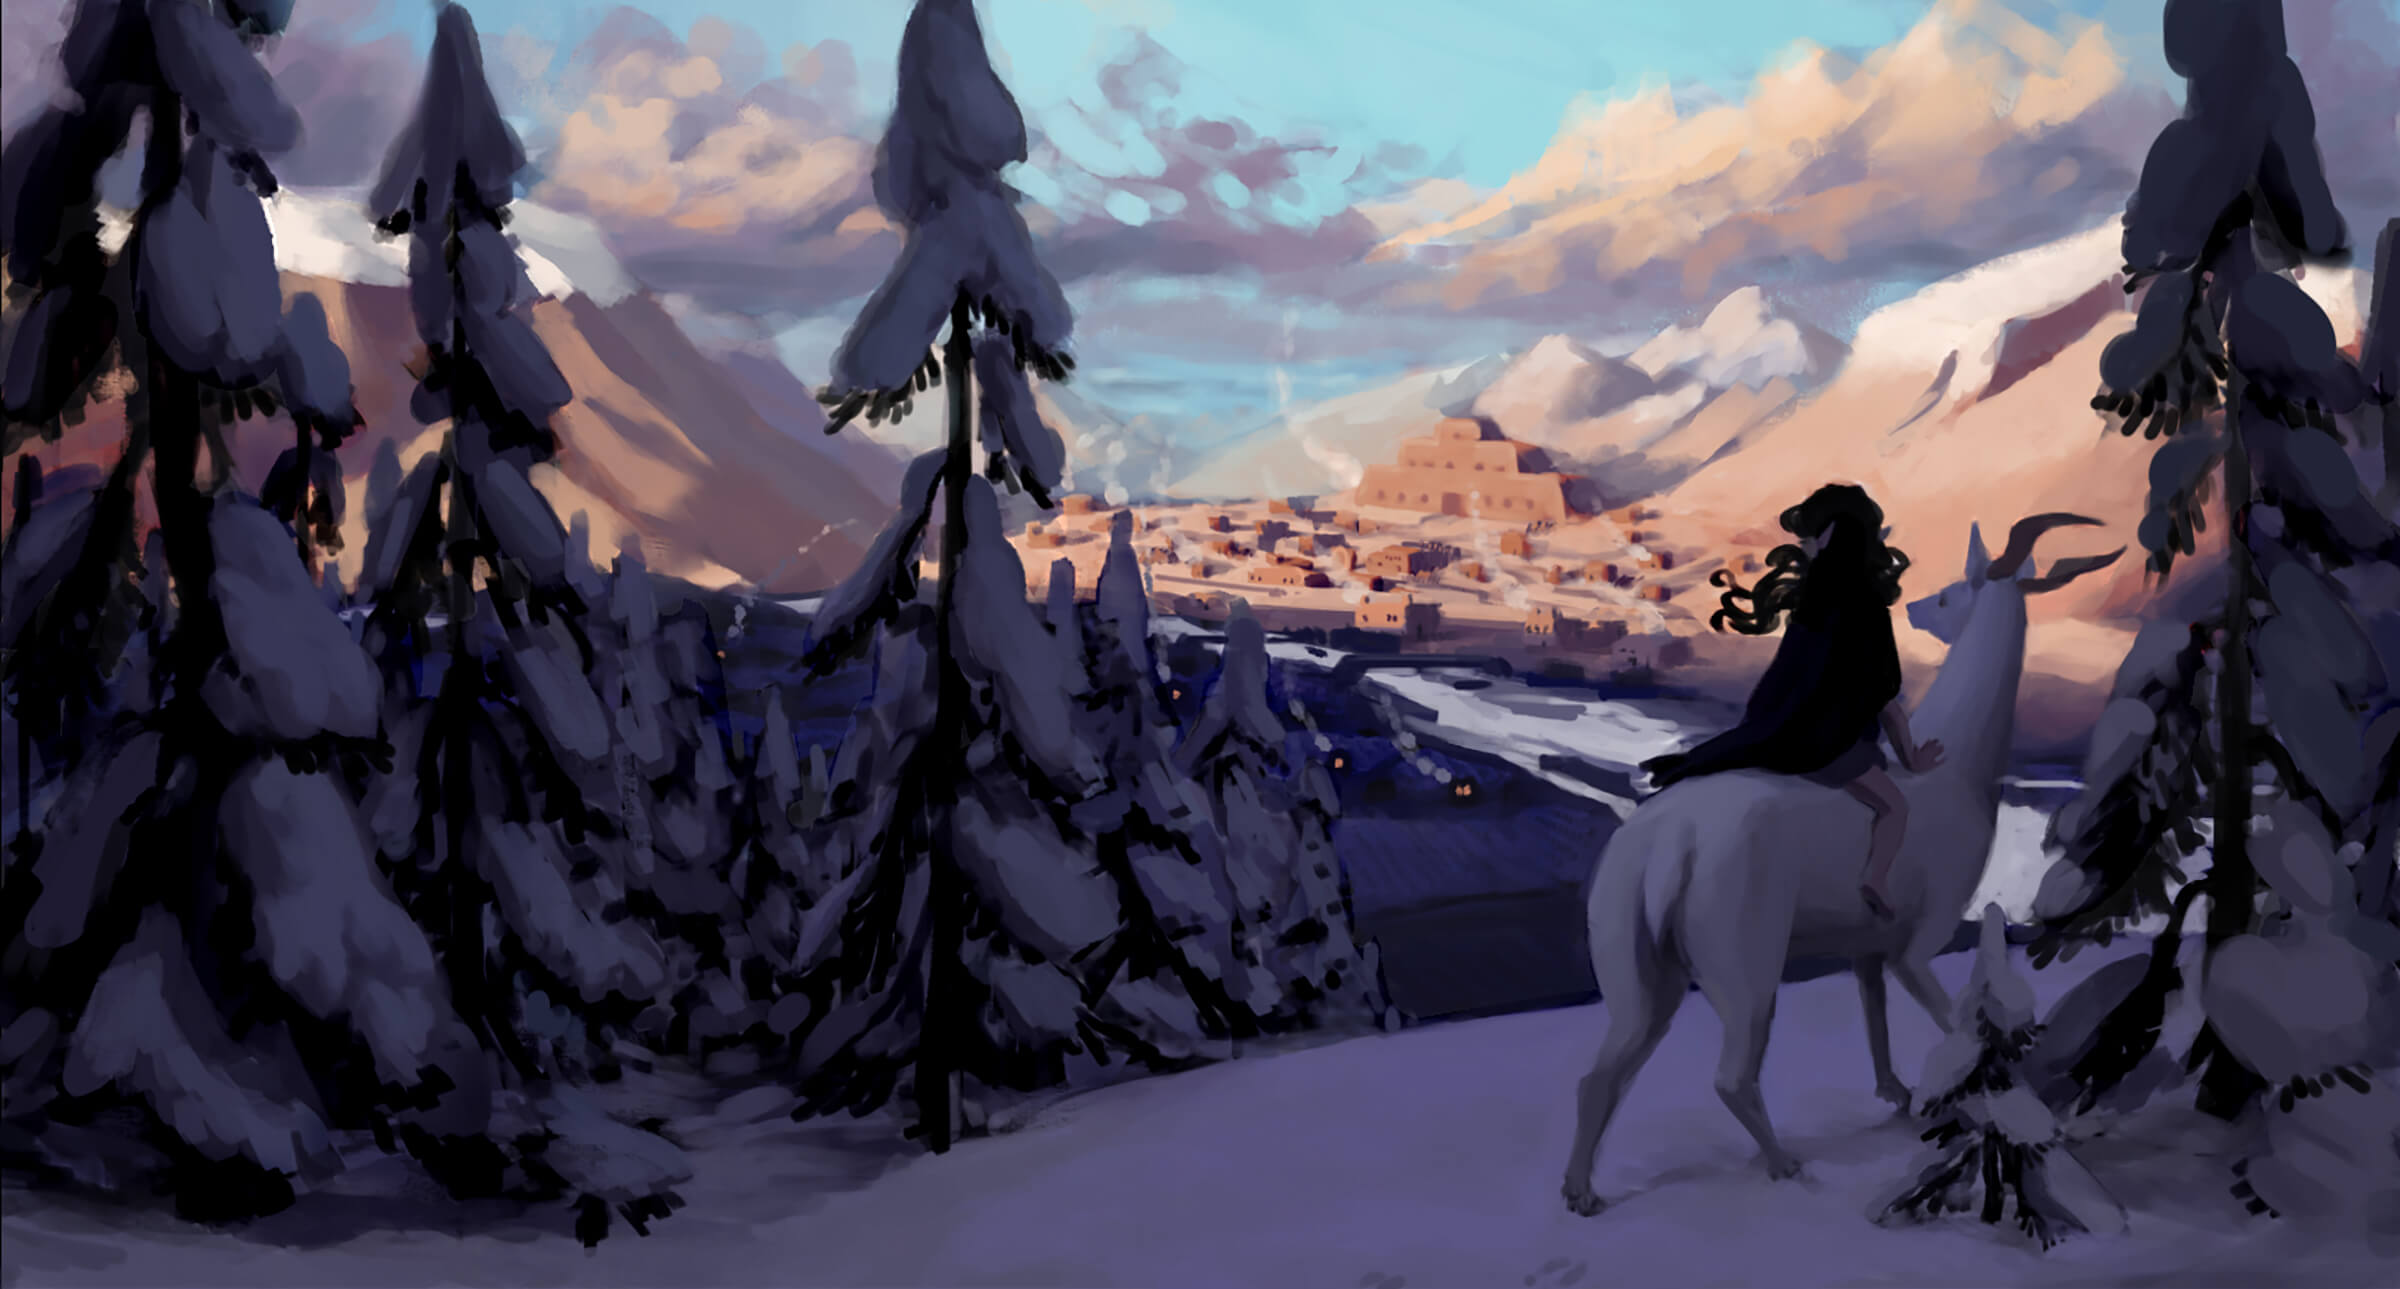 A woman rides a deer on a mountain overlooking a town